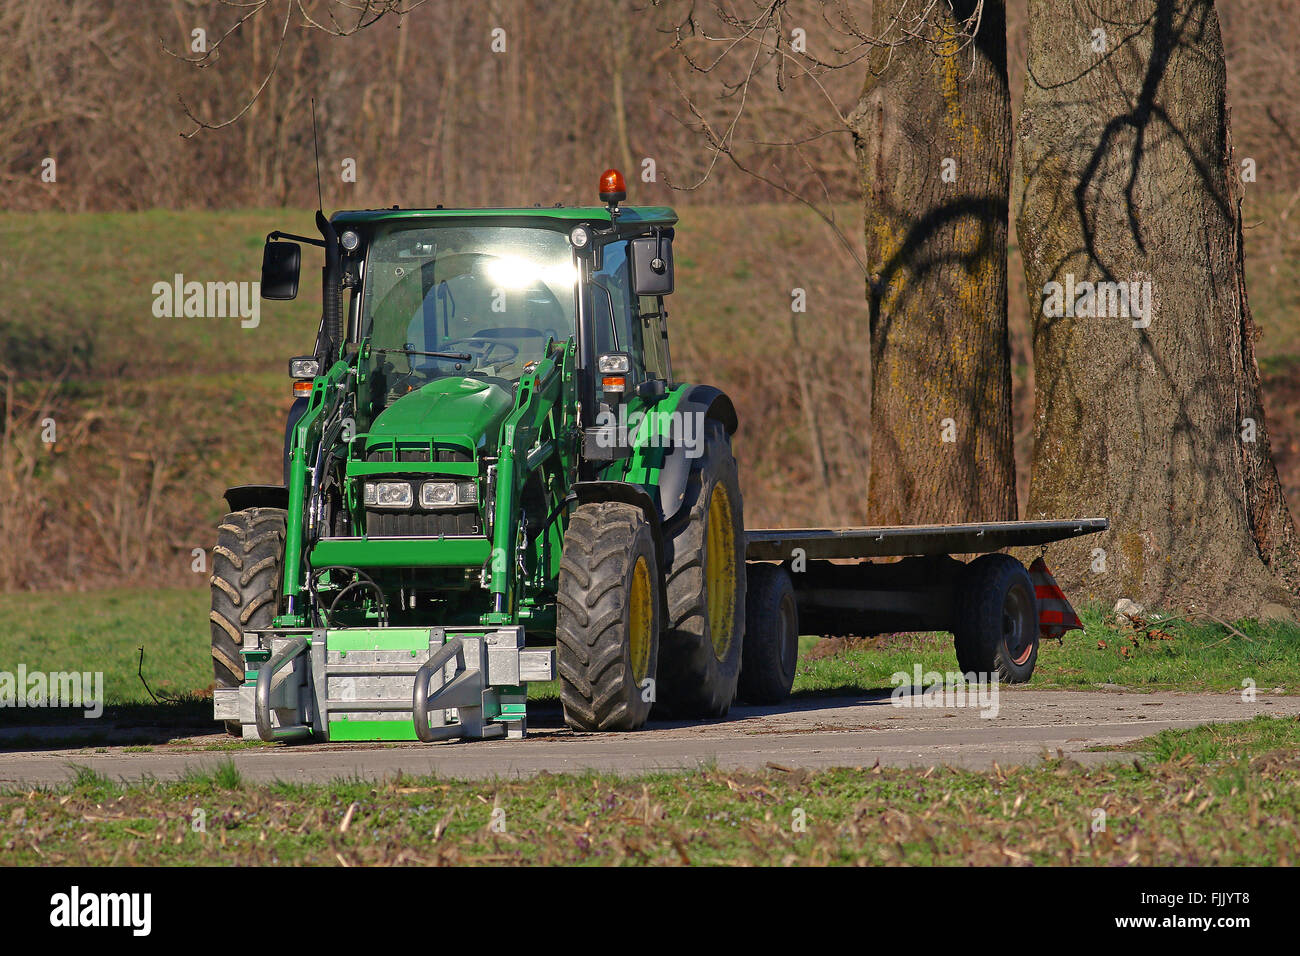 Green tractor and flatbed trailer Stock Photo